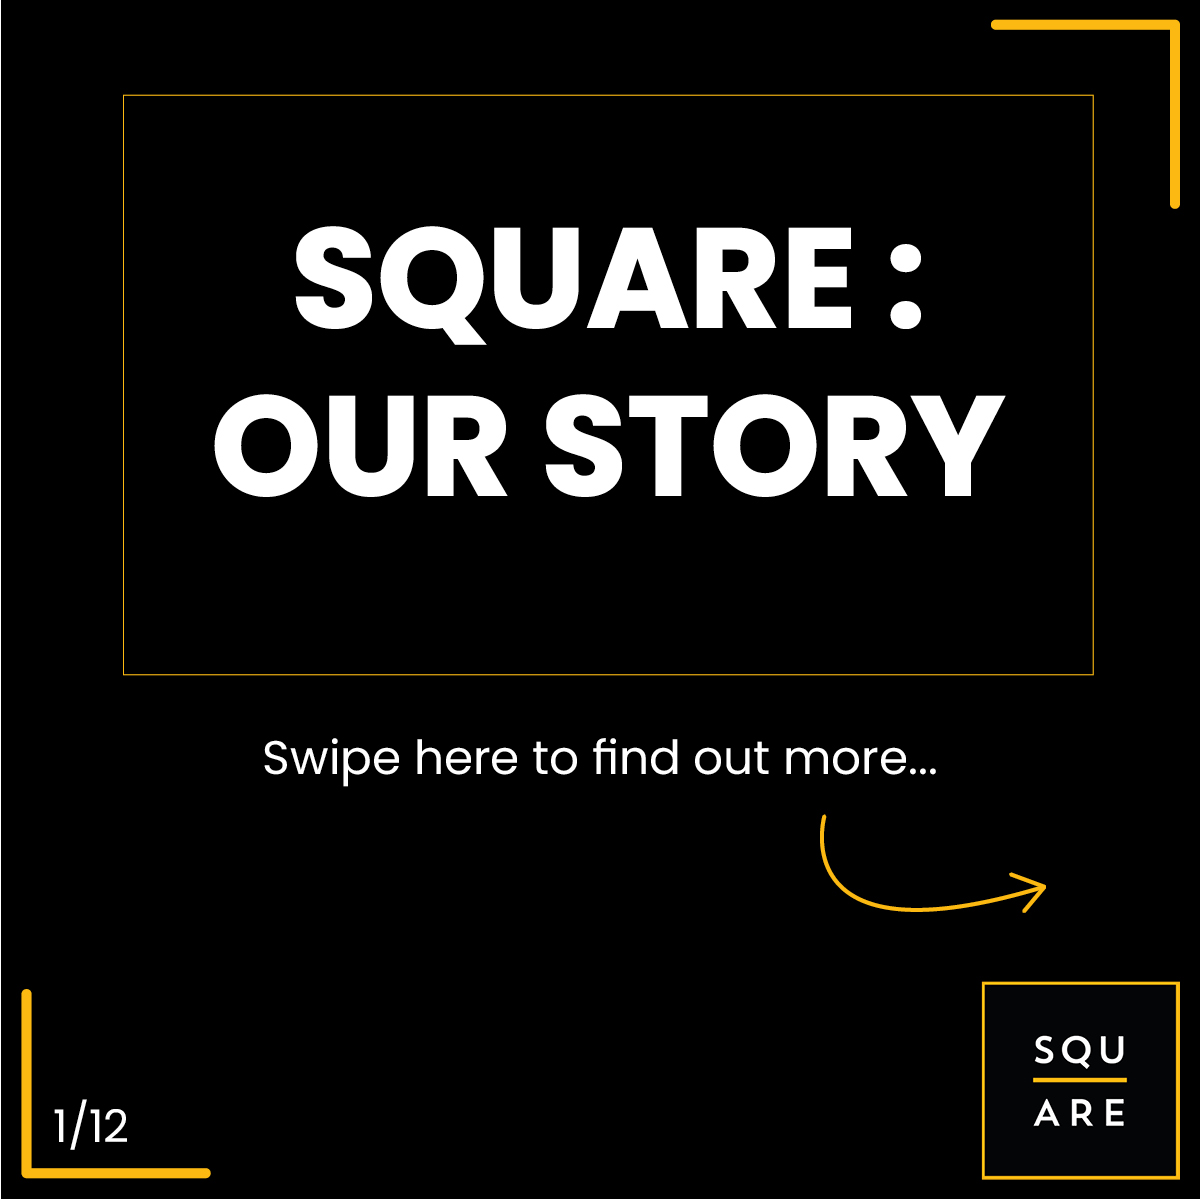 Square: our story